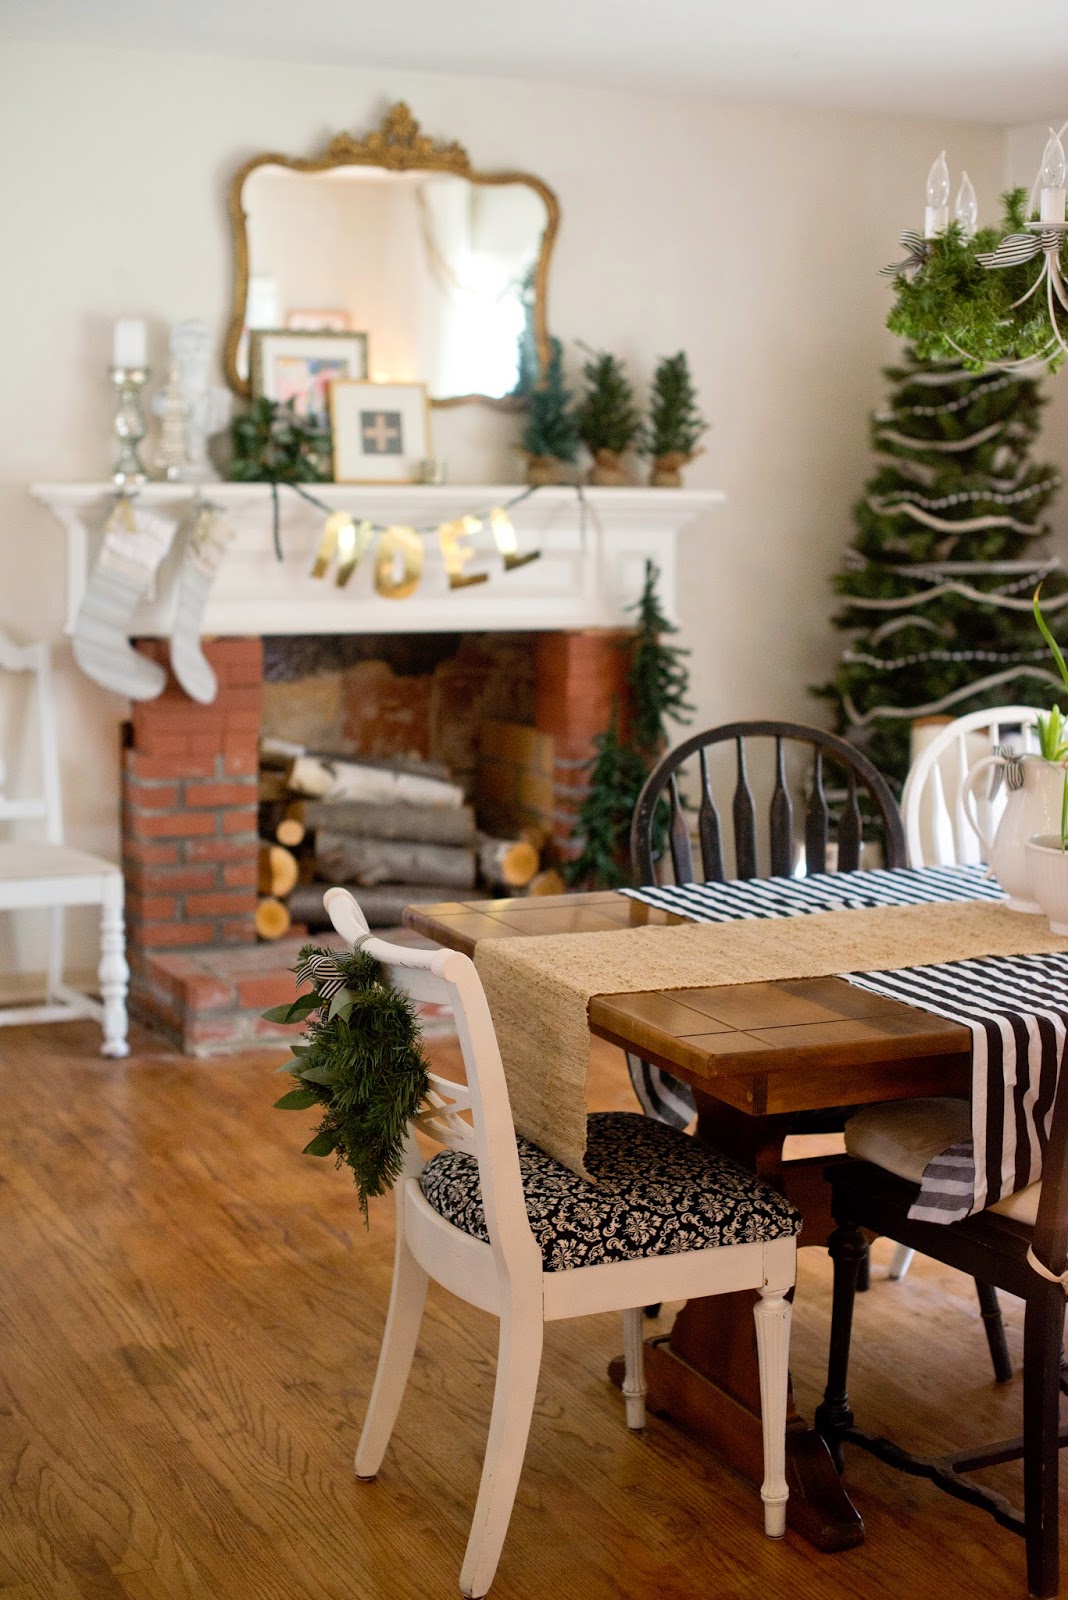 Domestic Fashionista: Rustic and Natural Christmas Dining Room